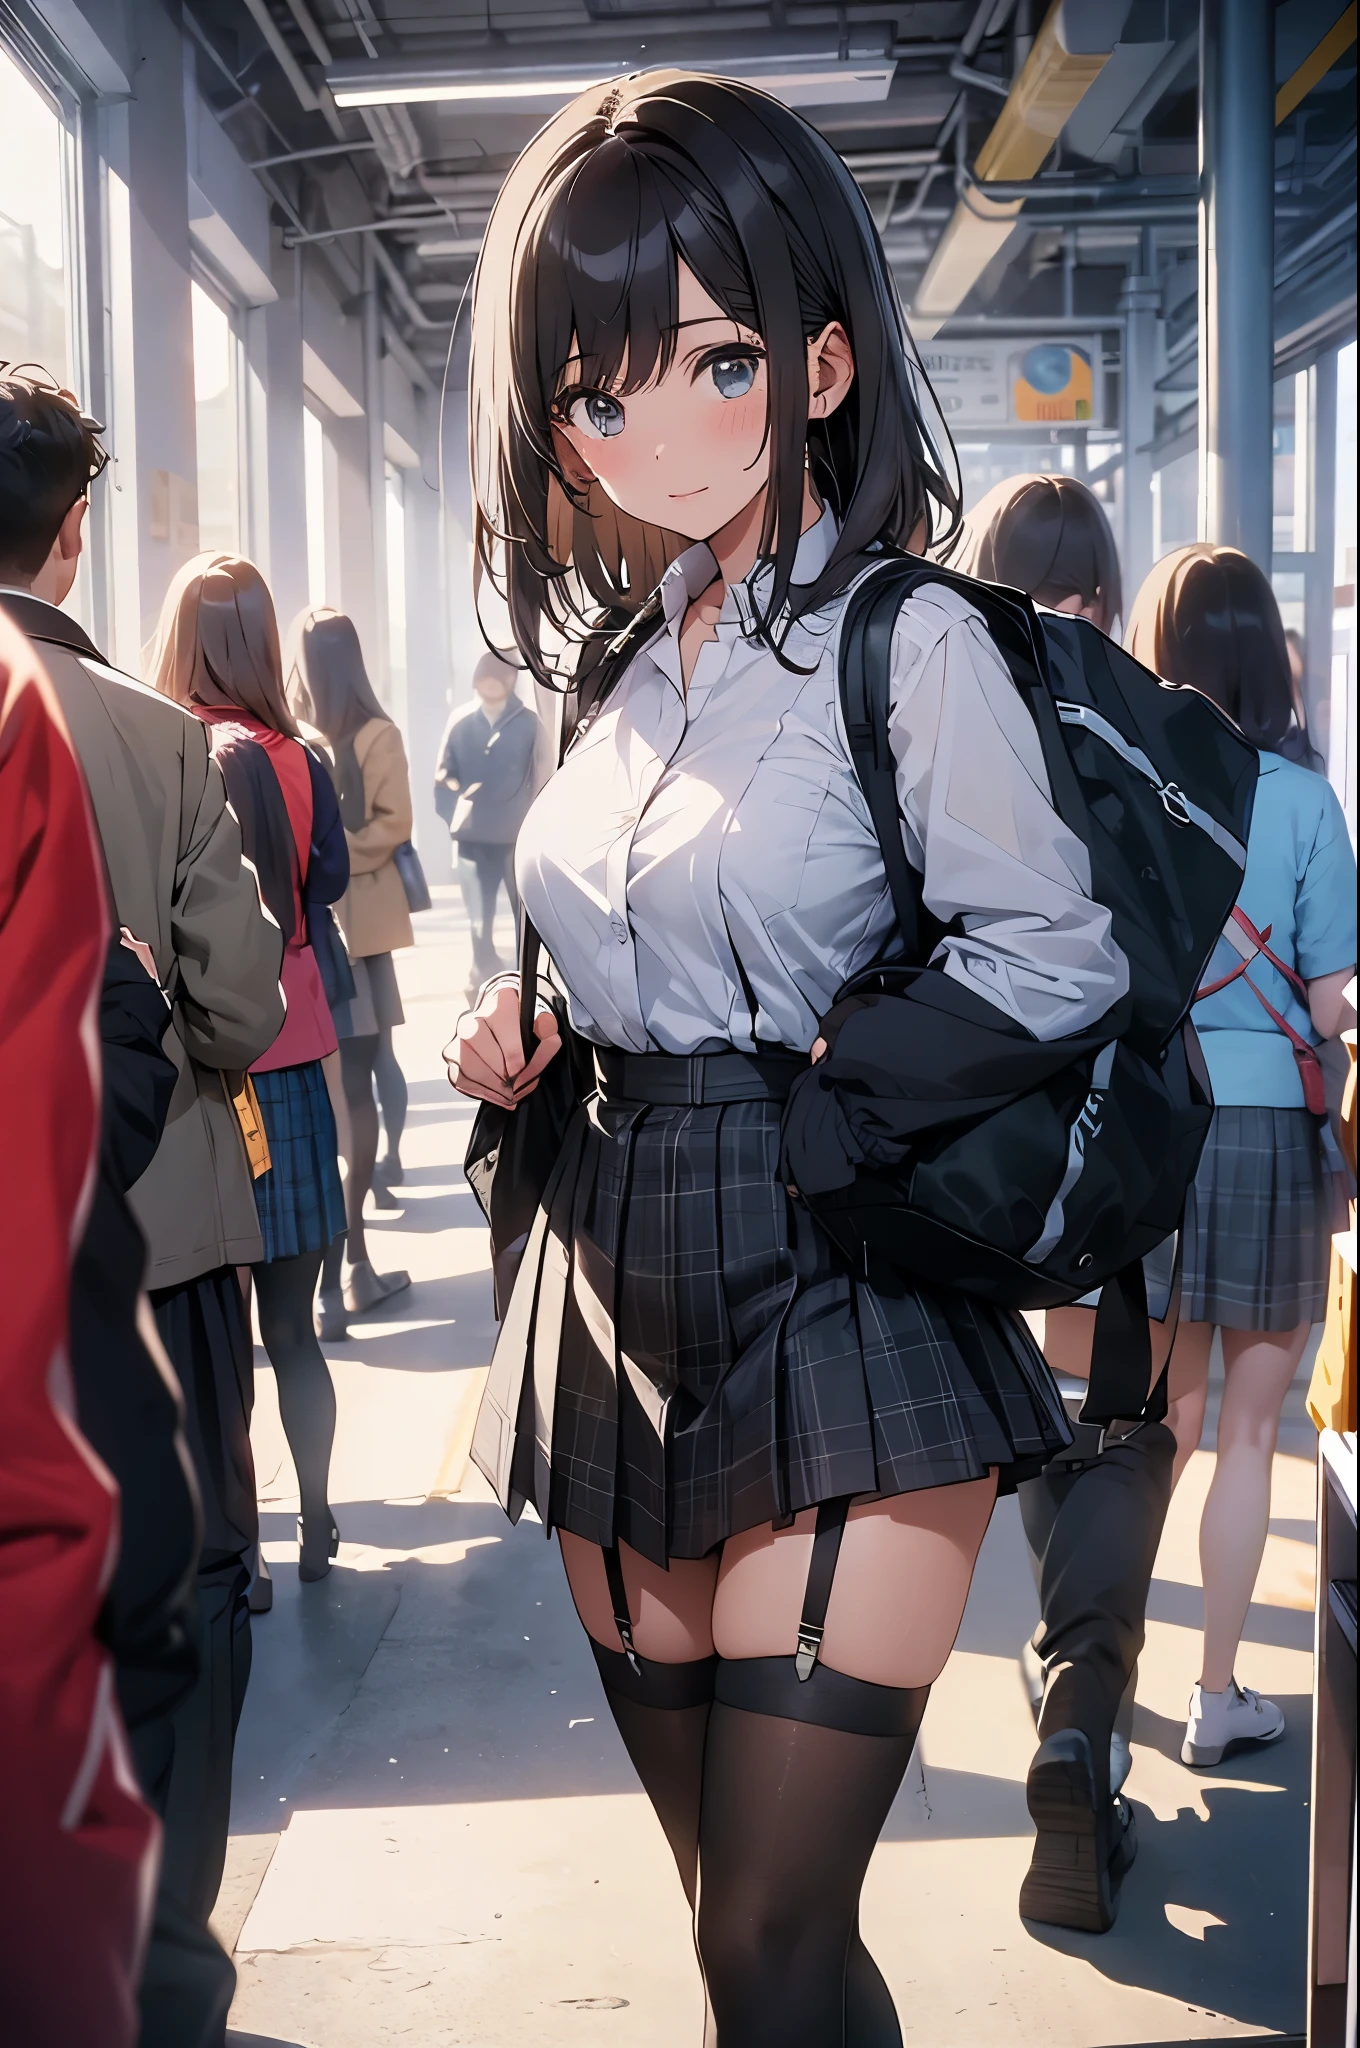 brown hair、looking at the viewer　　suspenders　　　Bulging big breasts　　 　 　　　　Black miniskirt　garter belt　knee high socks　　　　　　Gaze　　　small face　bangs 　　　　　Beauty　　hands up　　 　Gaze 　black boots 　provocation　　　one person 　　put your hands behind your back　cutter shirt　　Panty shot　